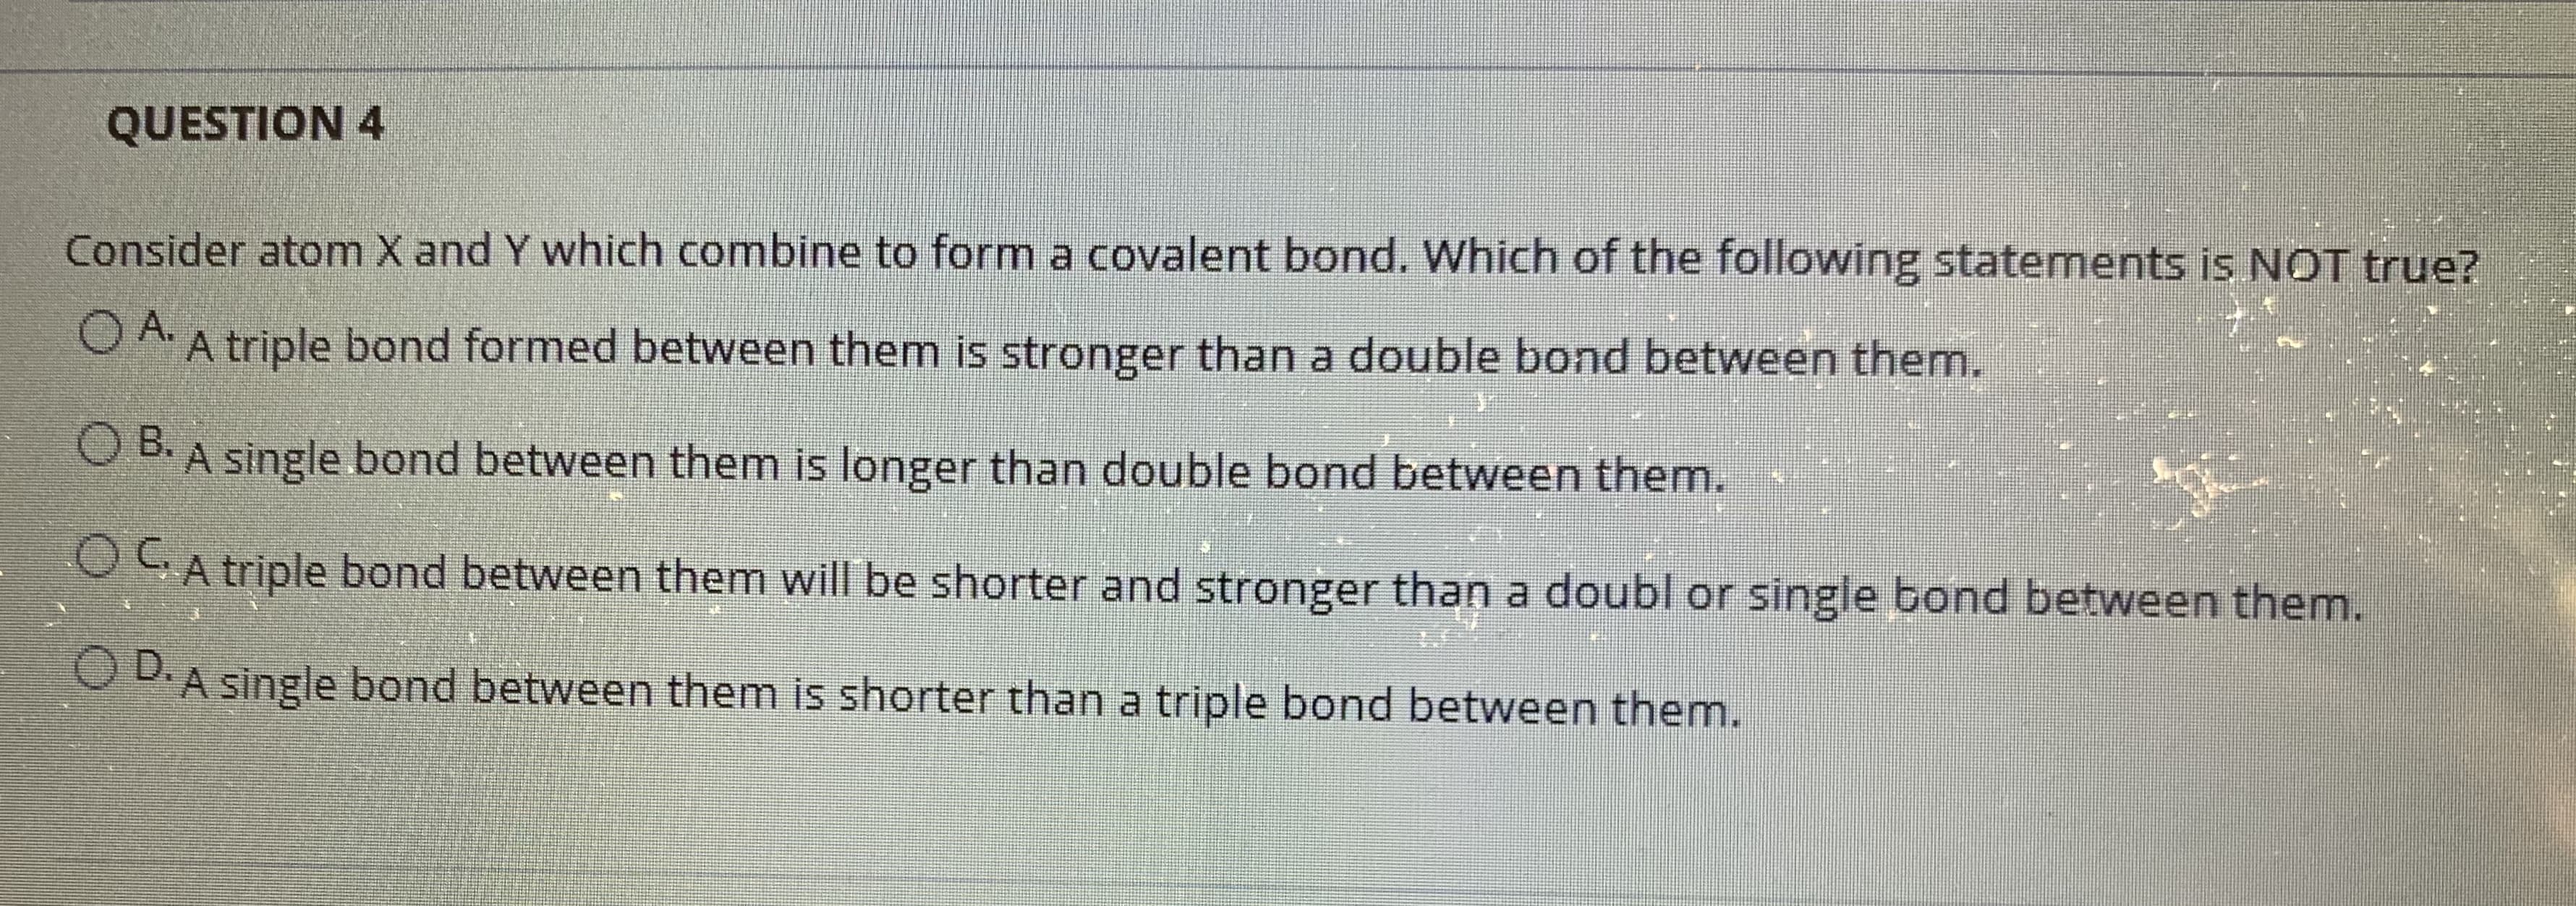 Consider atom X and Y which combine to form a covalent bond. Which of the following statements is NOT true?
